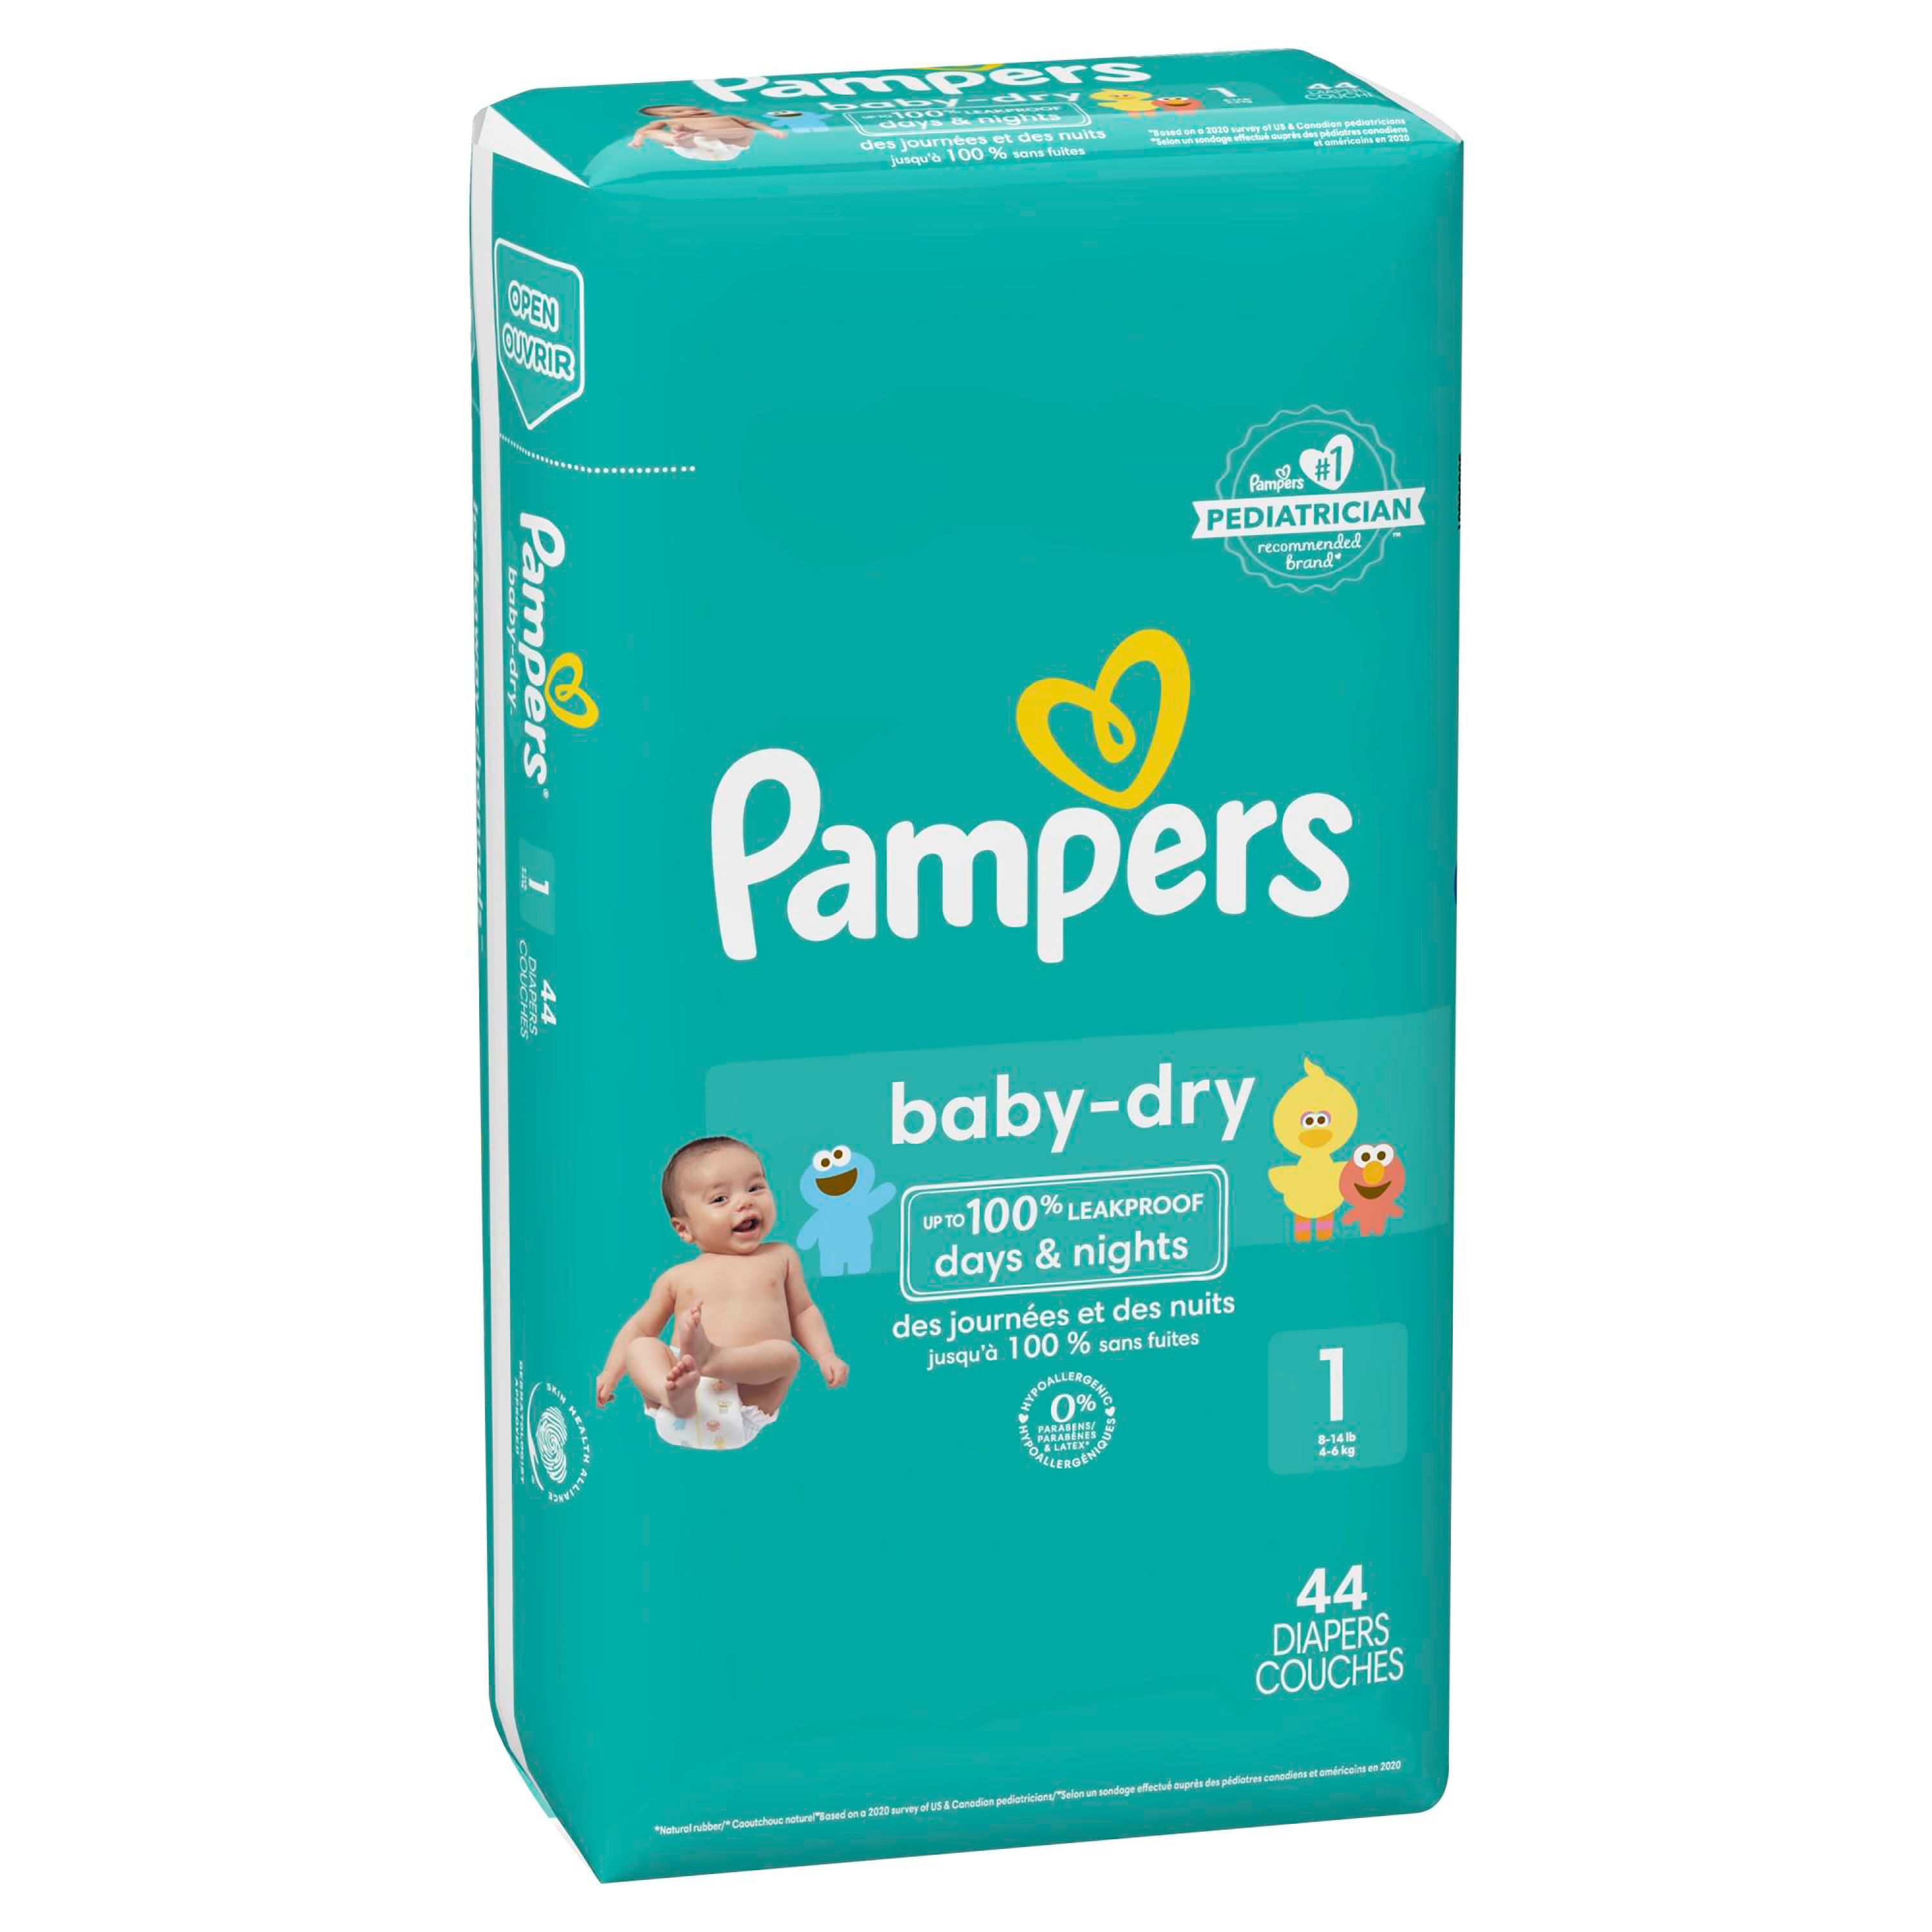 Pampers Pañales Baby-Dry, talla 7 Extra Large , 17kg+, caja mensual (1 x  126 pañales) 